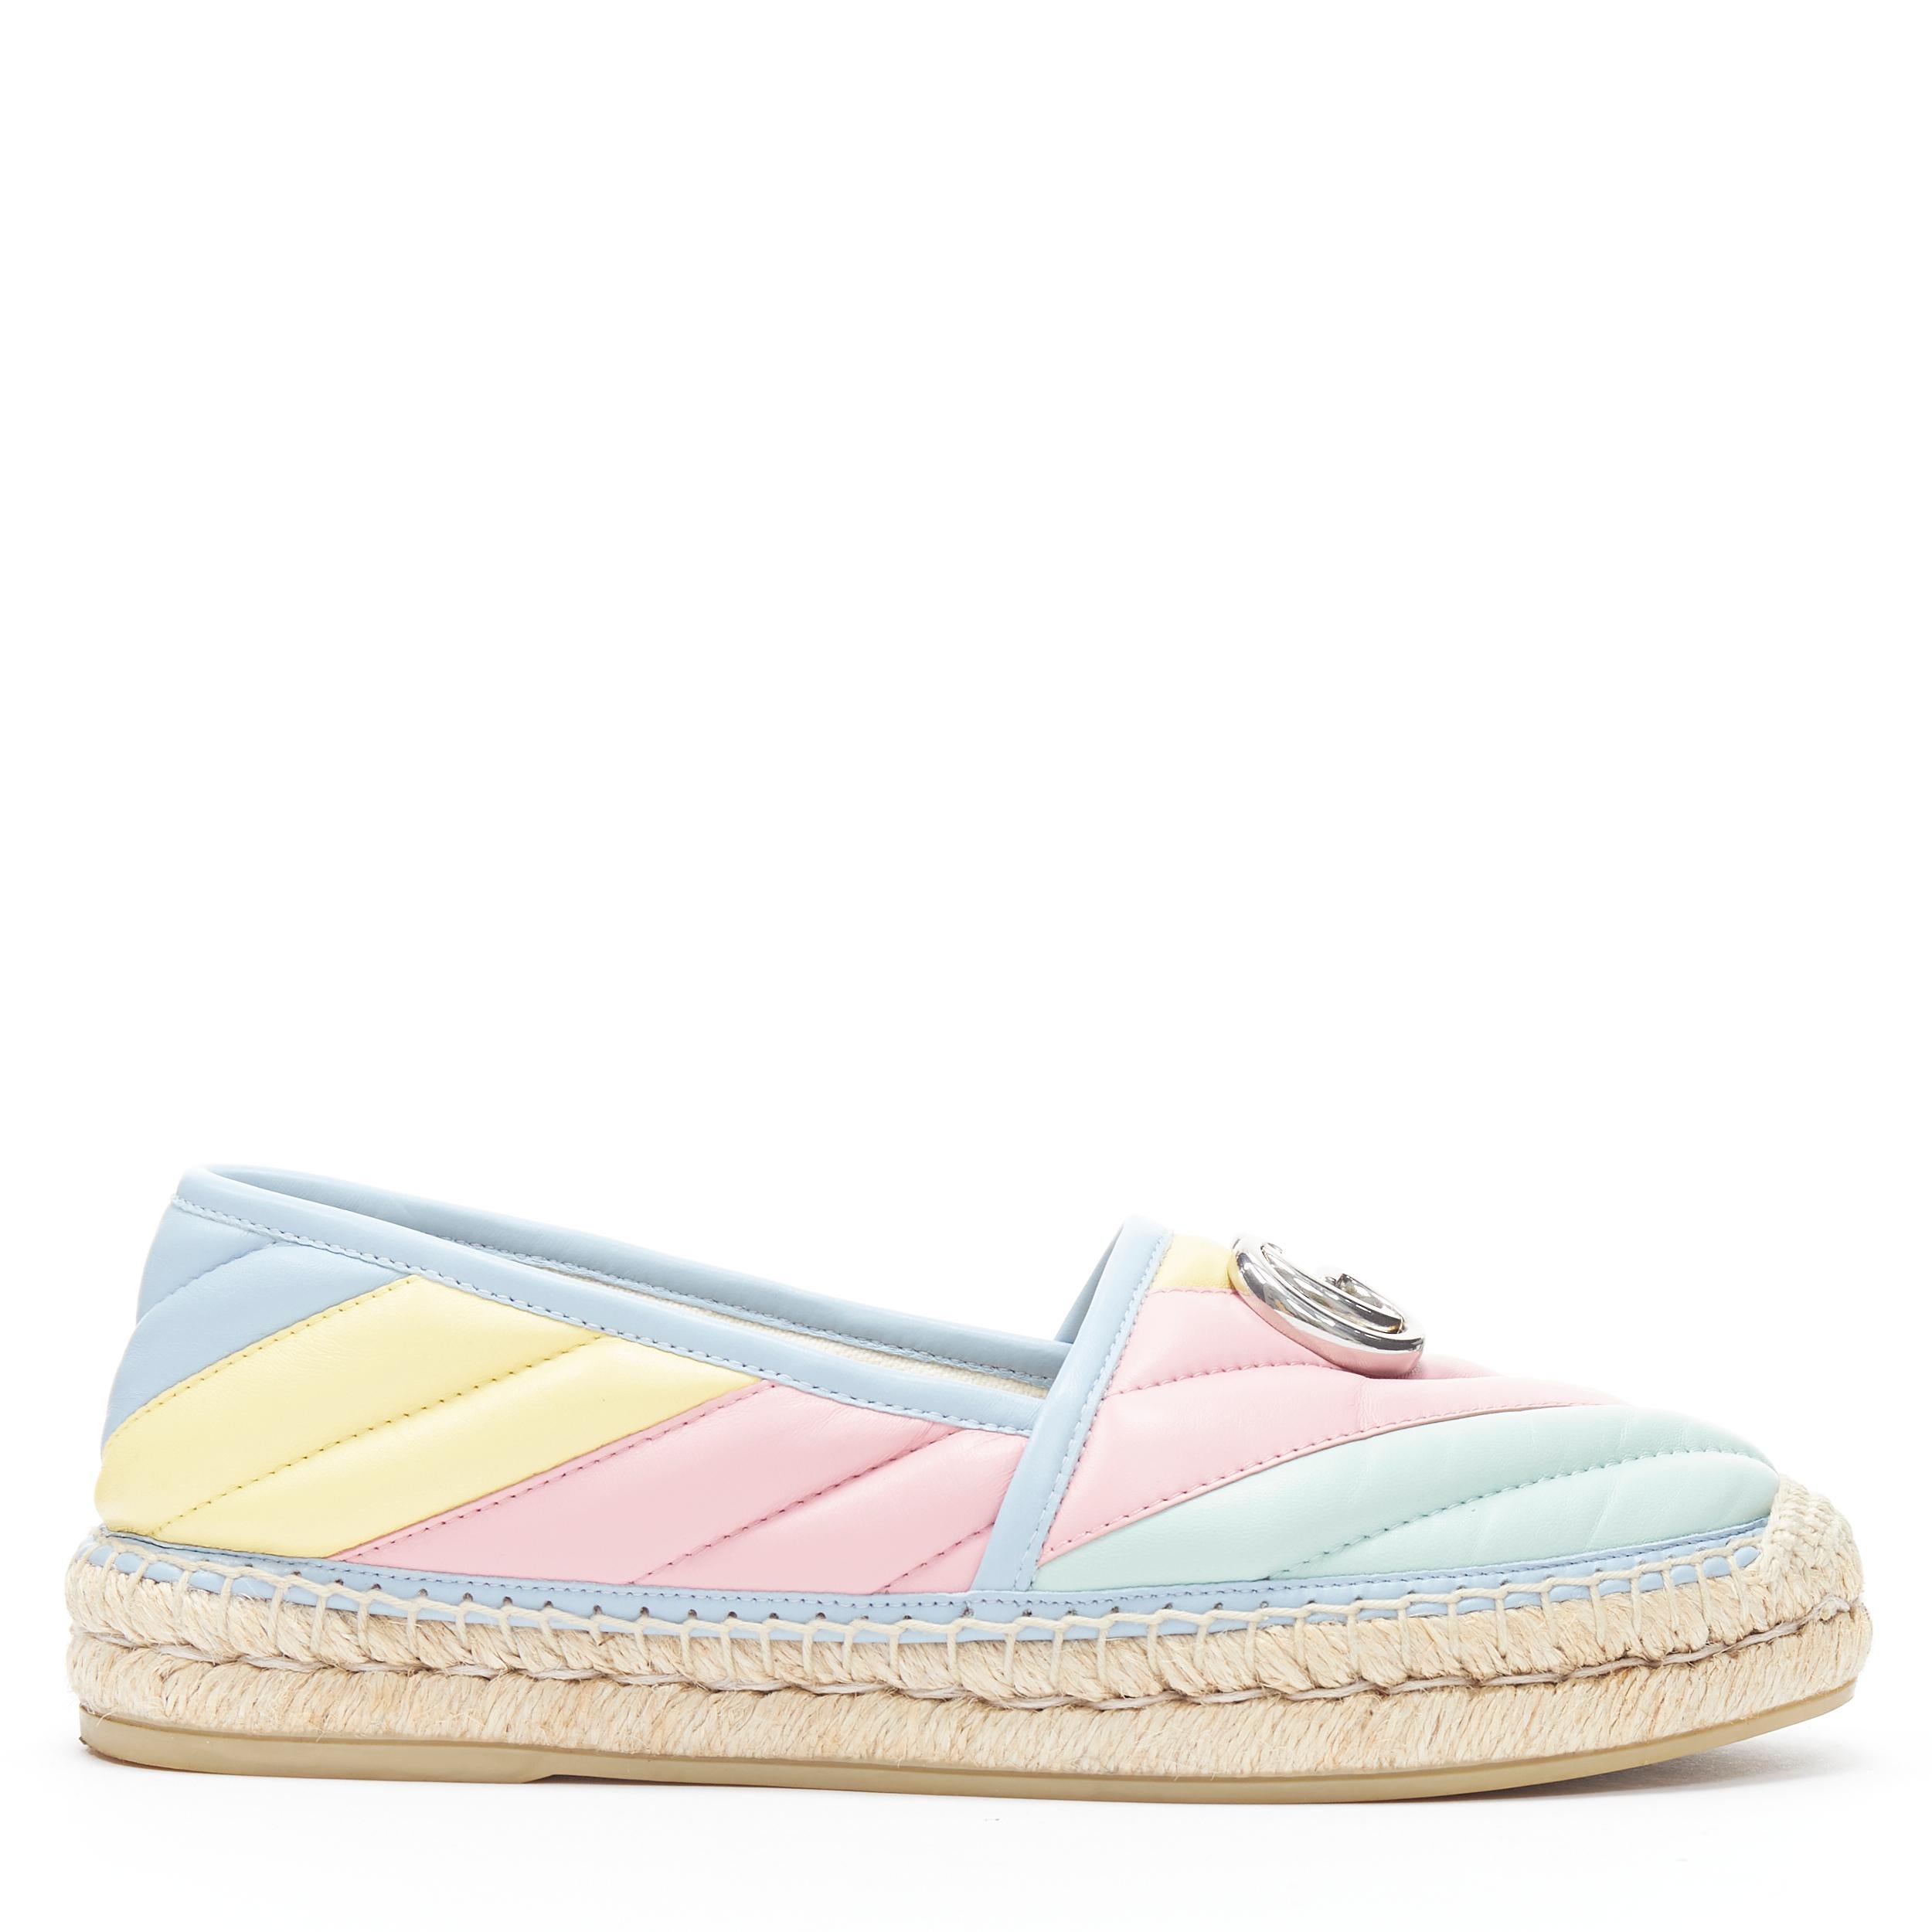 GUCCI Black Double G Marmont pastel matelasse leather jute espadrille EU37.5 
Reference: TGAS/B01371 
Brand: Gucci 
Model: Marmont Matelasse Palladium Double G Espadrille 
Material: Leather 
Color: Pink 
Pattern: Solid 
Extra Detail: Silver-tone